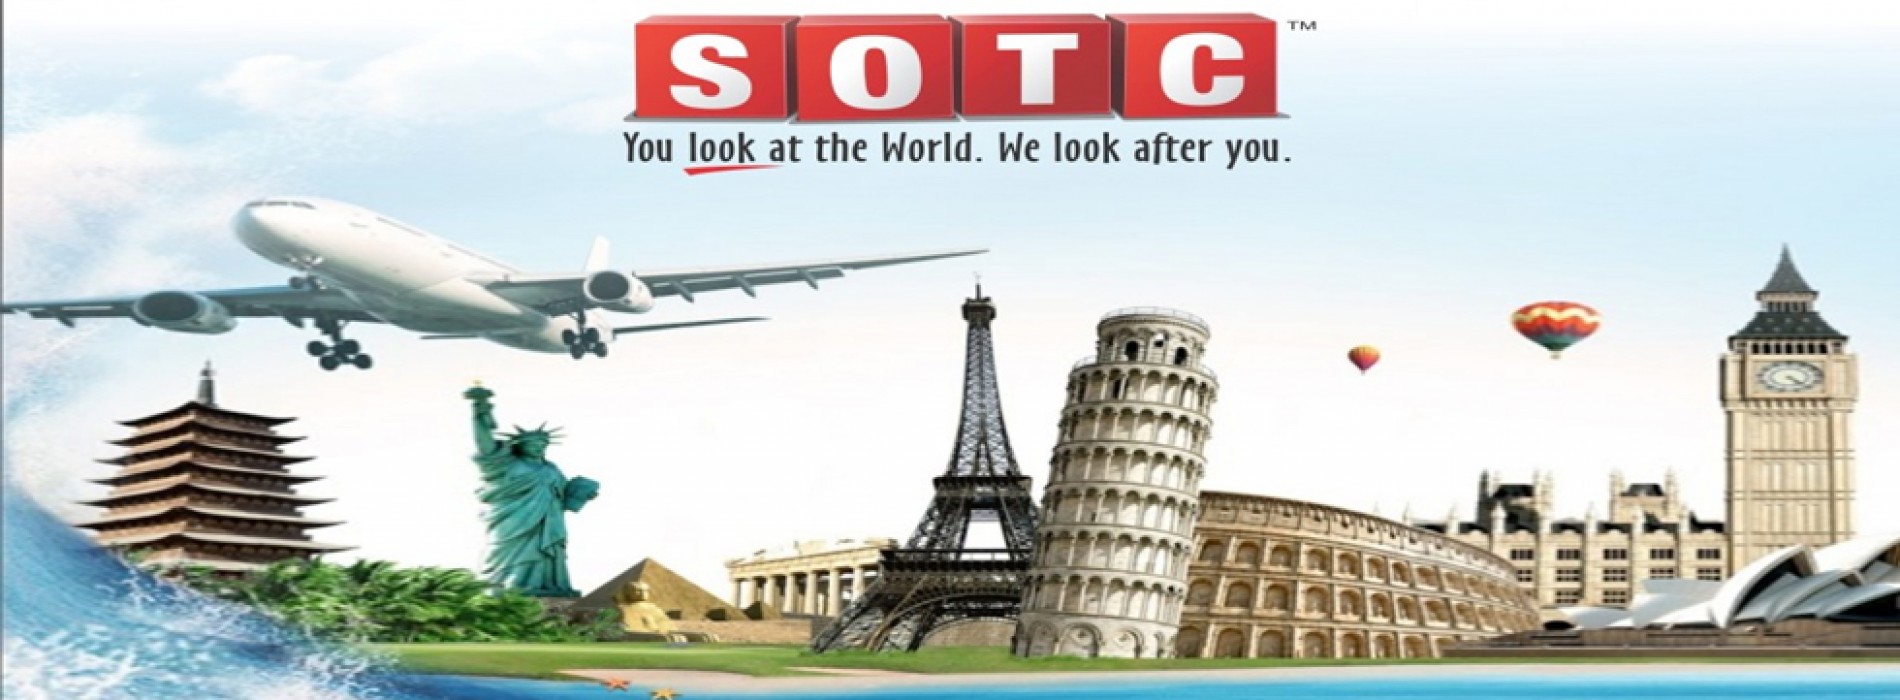 SOTC enters the Travel E Commerce space with the launch of its all new www.sotc.in